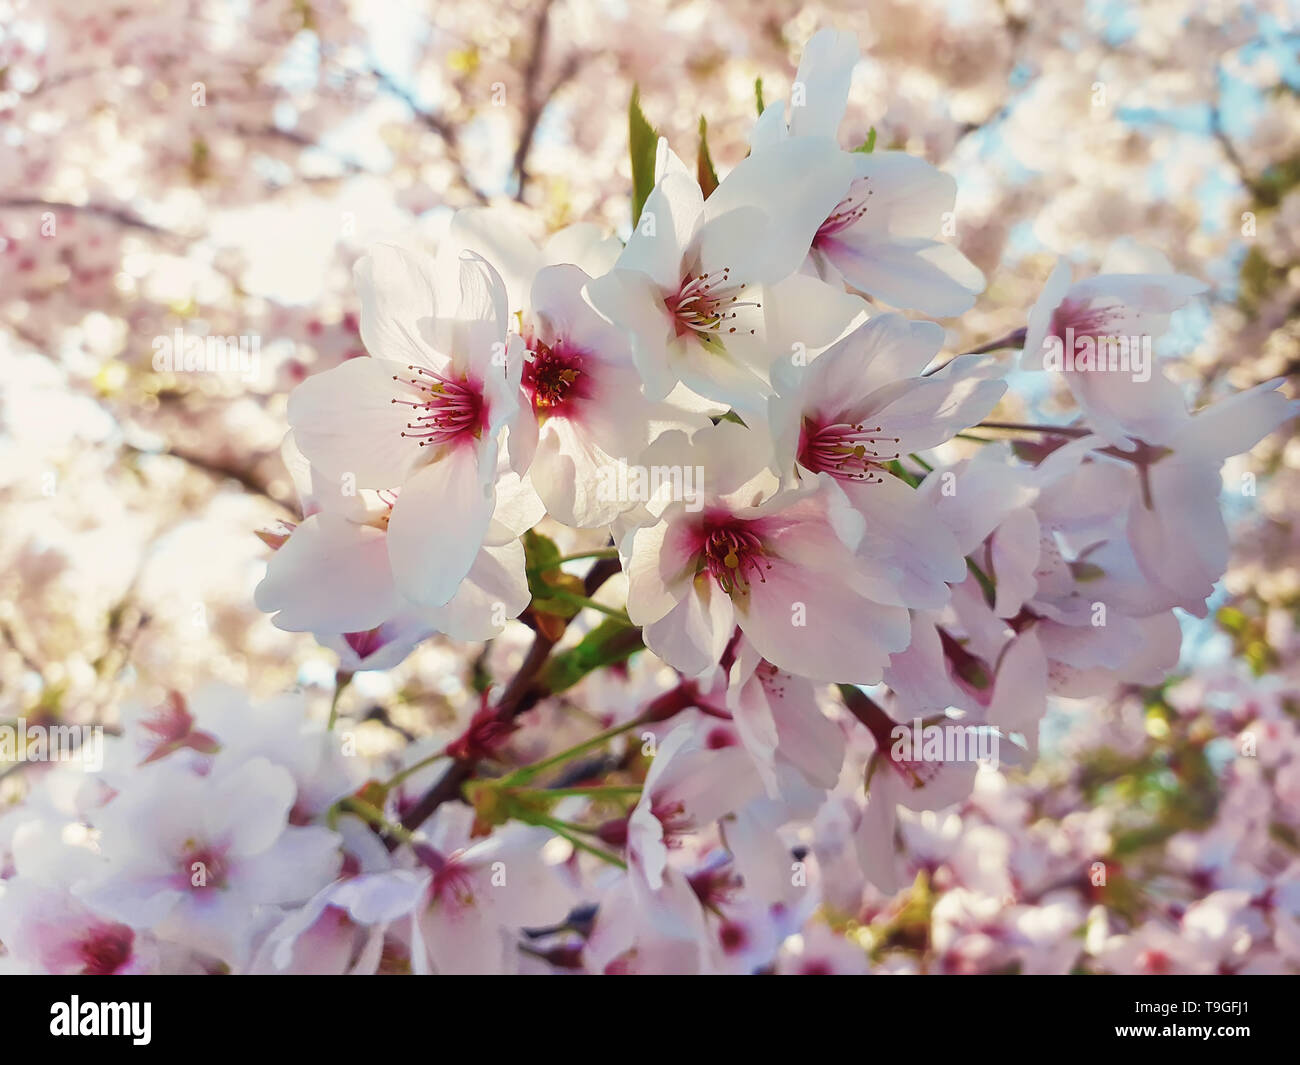 Close up of a wild white cherry tree blooming. Spring flowers background, cluster blossoms on the branch in the park. Beautiful nature seasonal scene. Stock Photo